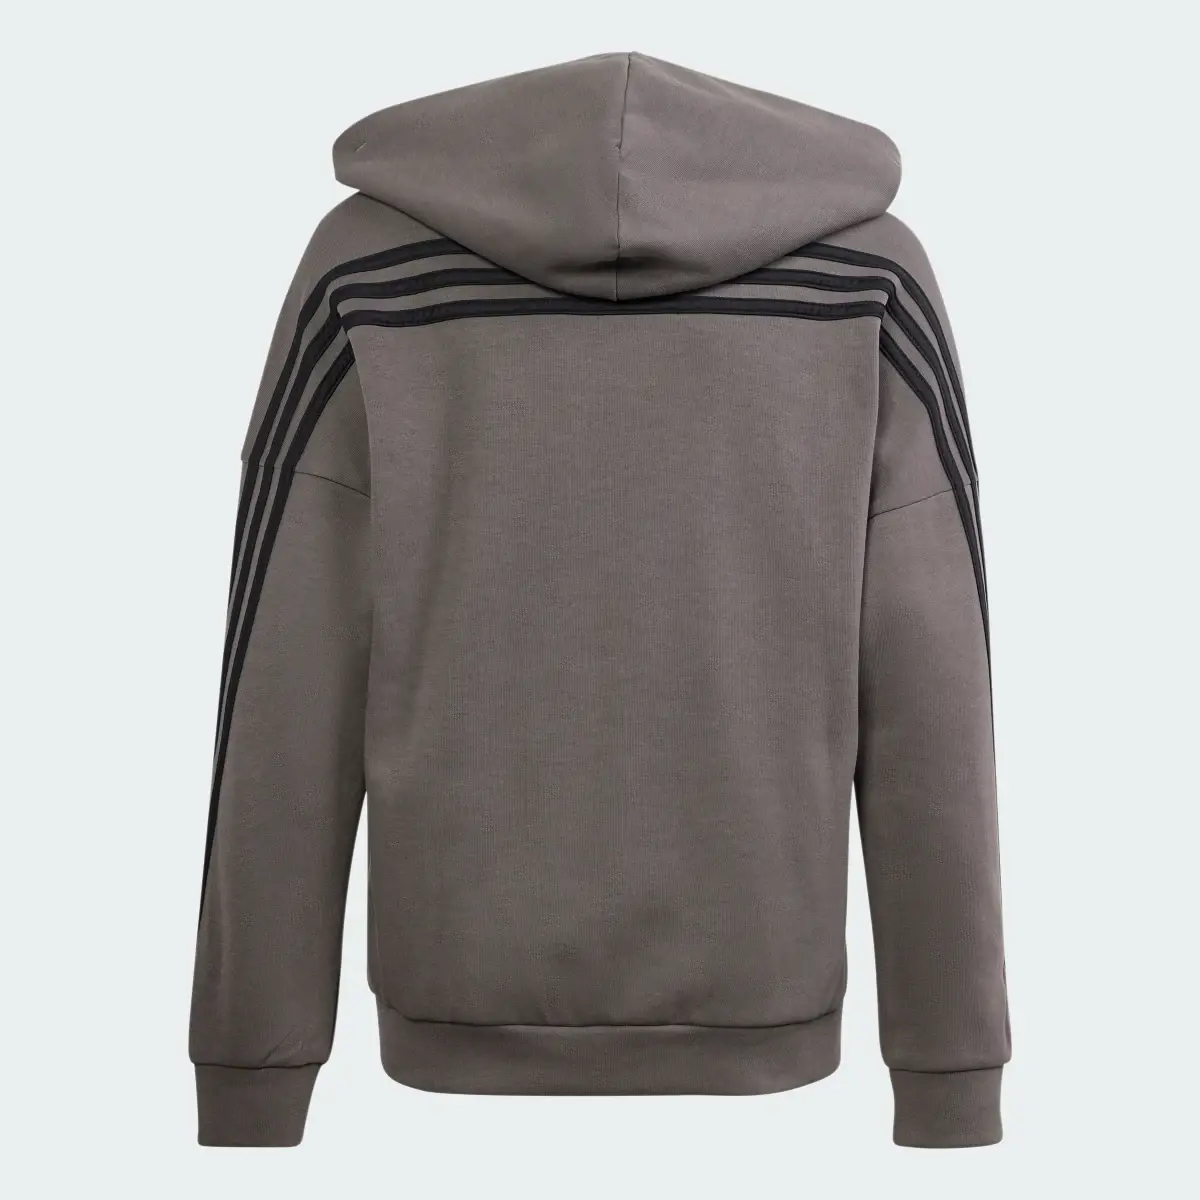 Adidas Future Icons 3-Stripes Full-Zip Hooded Track Top. 2